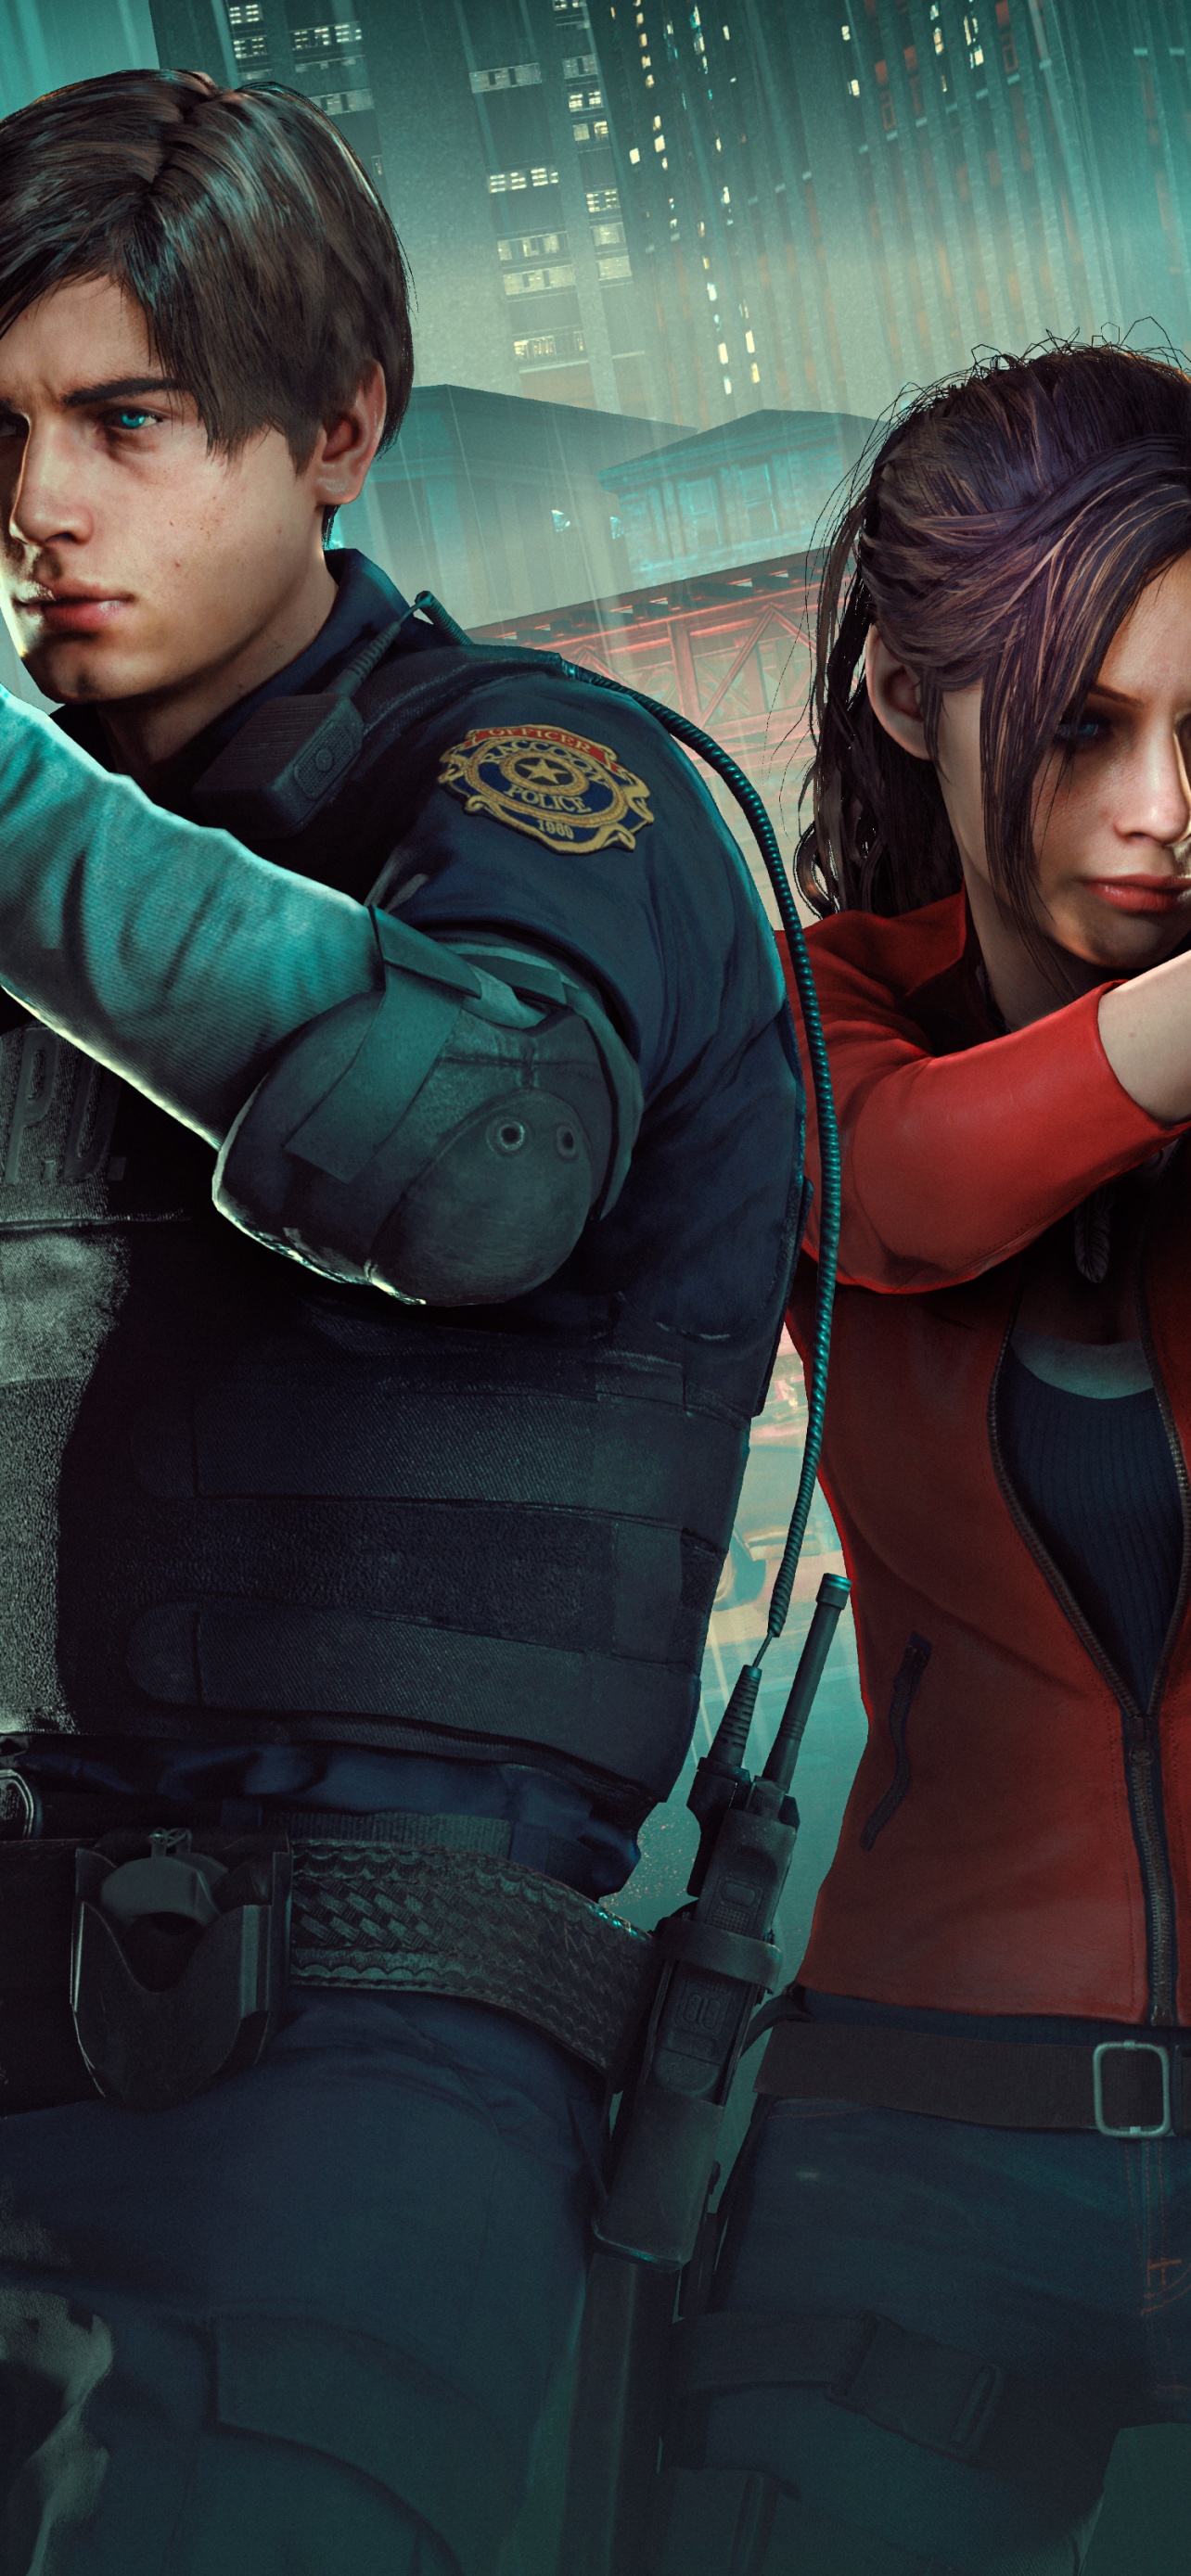 Wallpaper Resident Evil Resident Evil 2 Resident Evil 4 Leon S Kennedy Claire  Redfield Background  Download Free Image